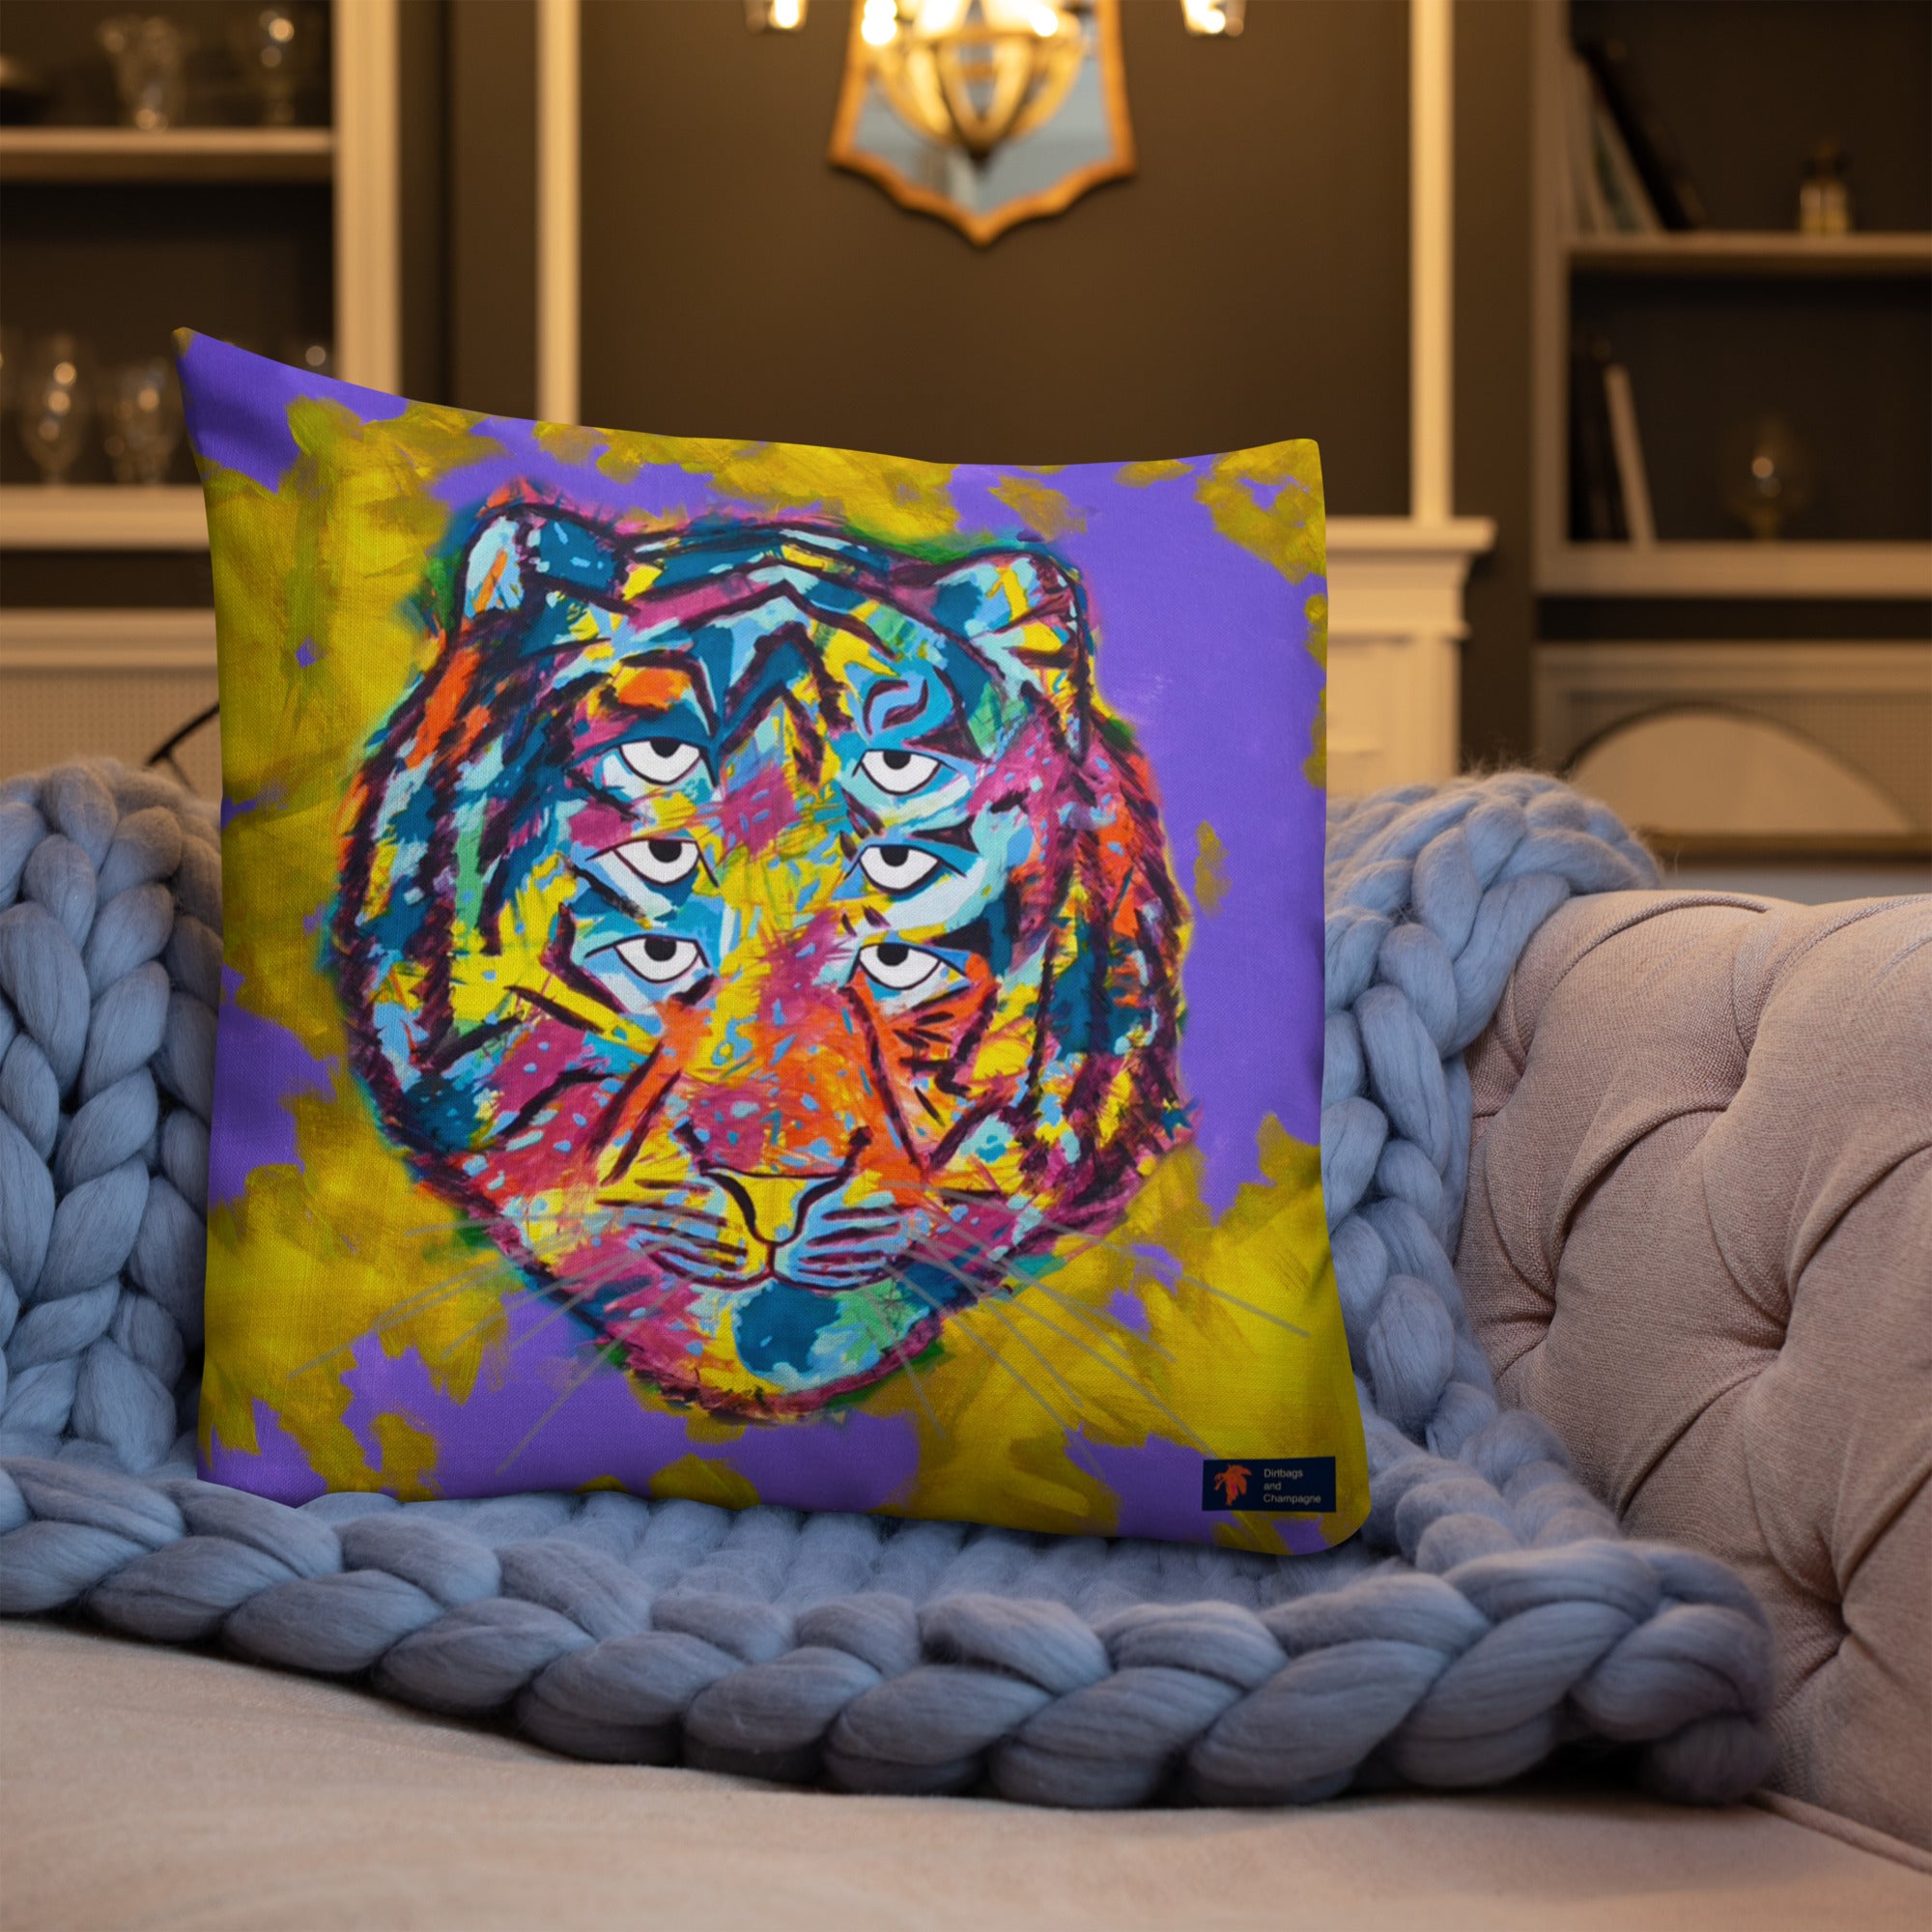 6 eyed rainbow tiger with purple and Yellow Premium Pillow